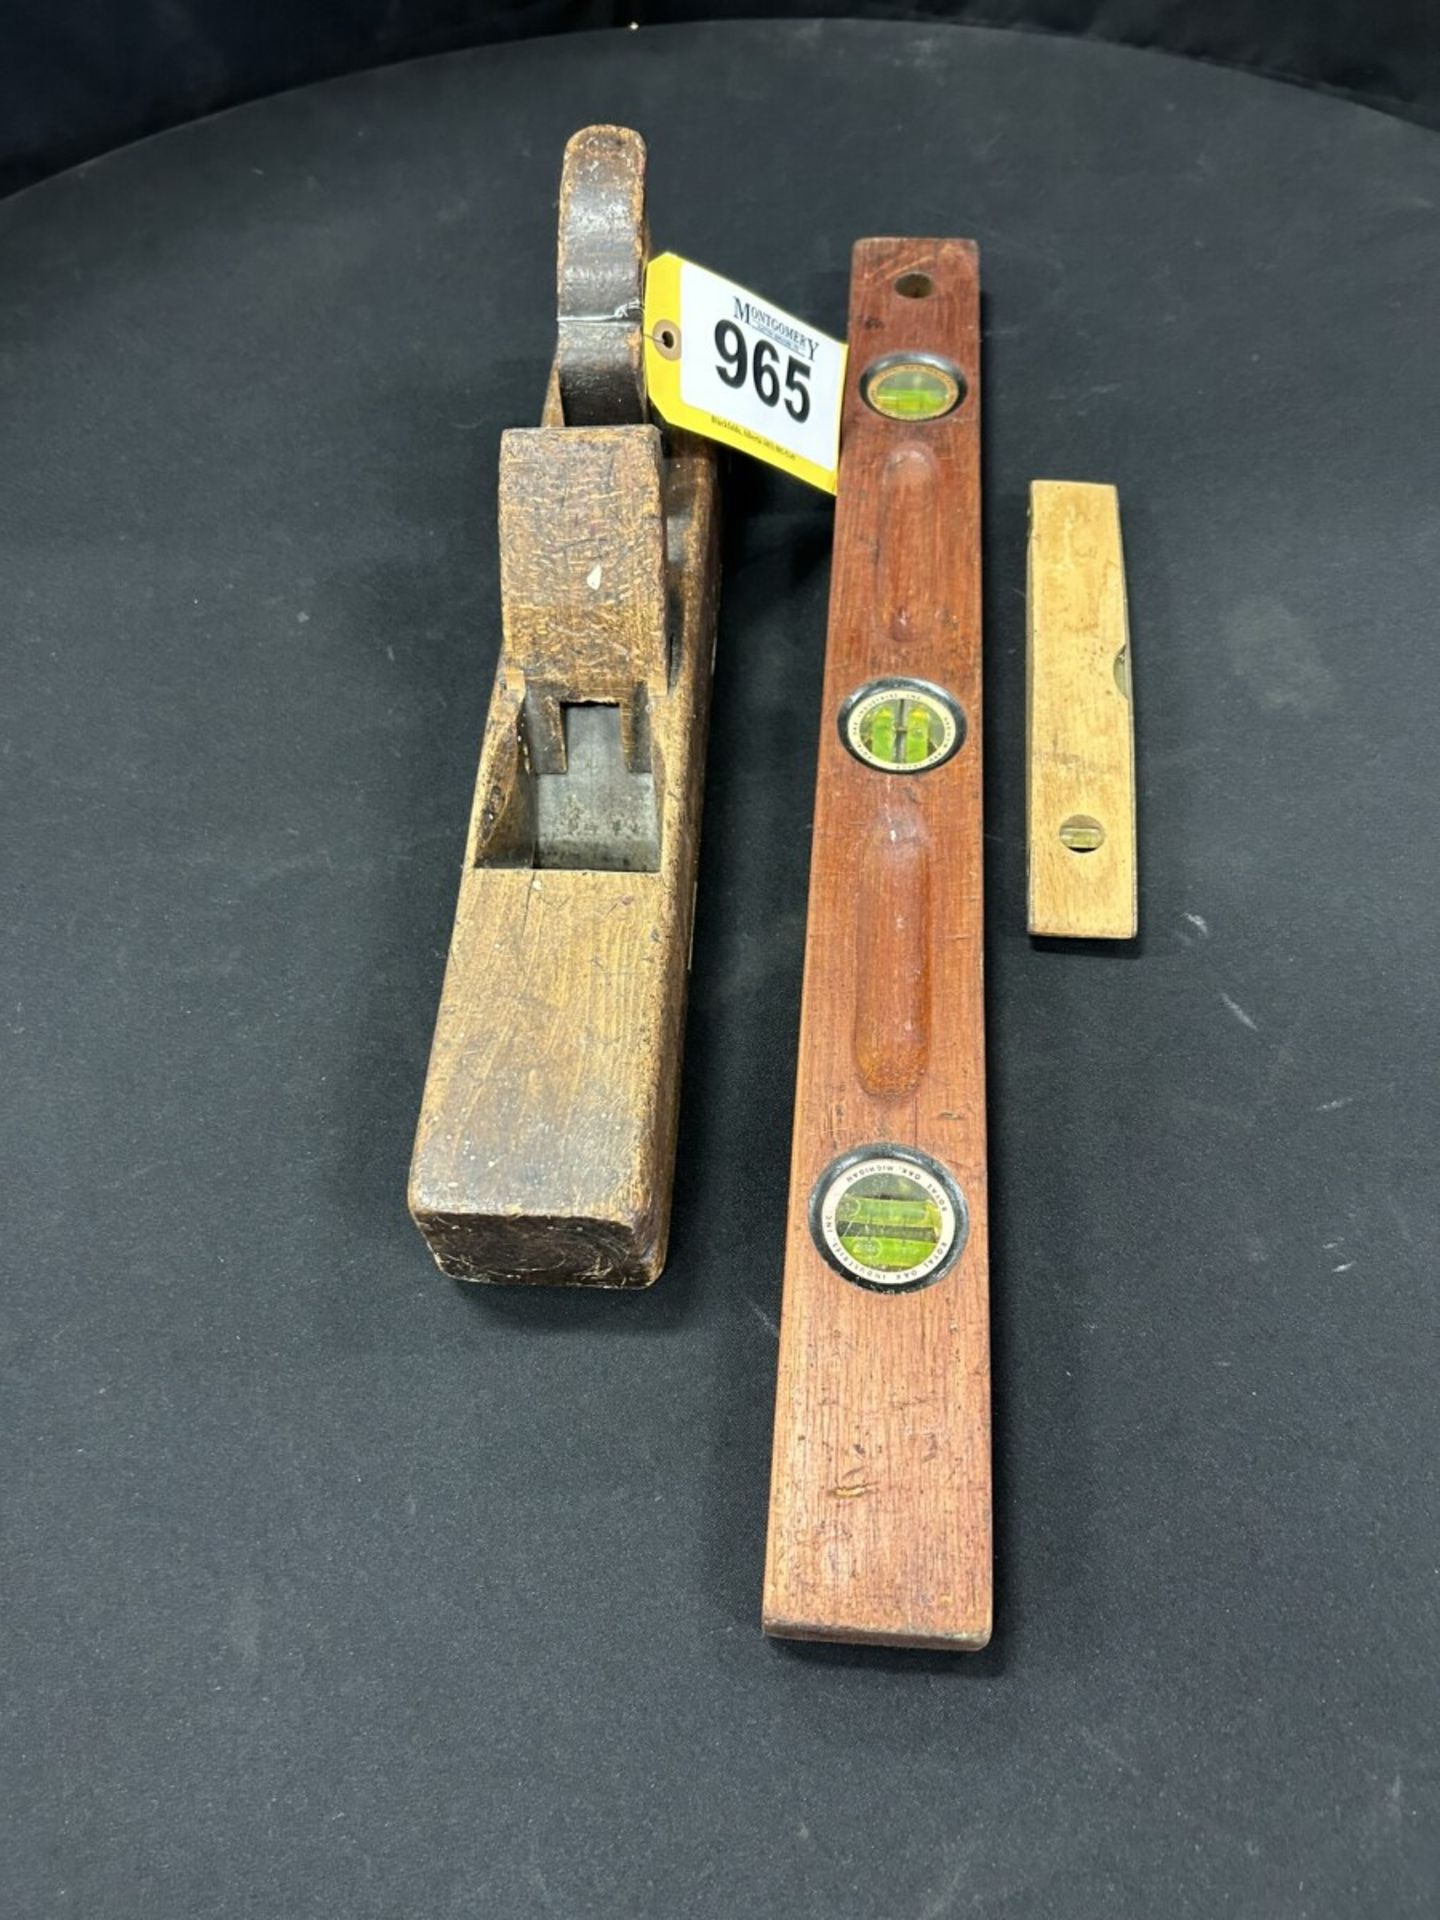 ANTIQUE WOODEN BLOCK PLANE AND WOODEN CARPENTERS LEVELS - Image 2 of 5